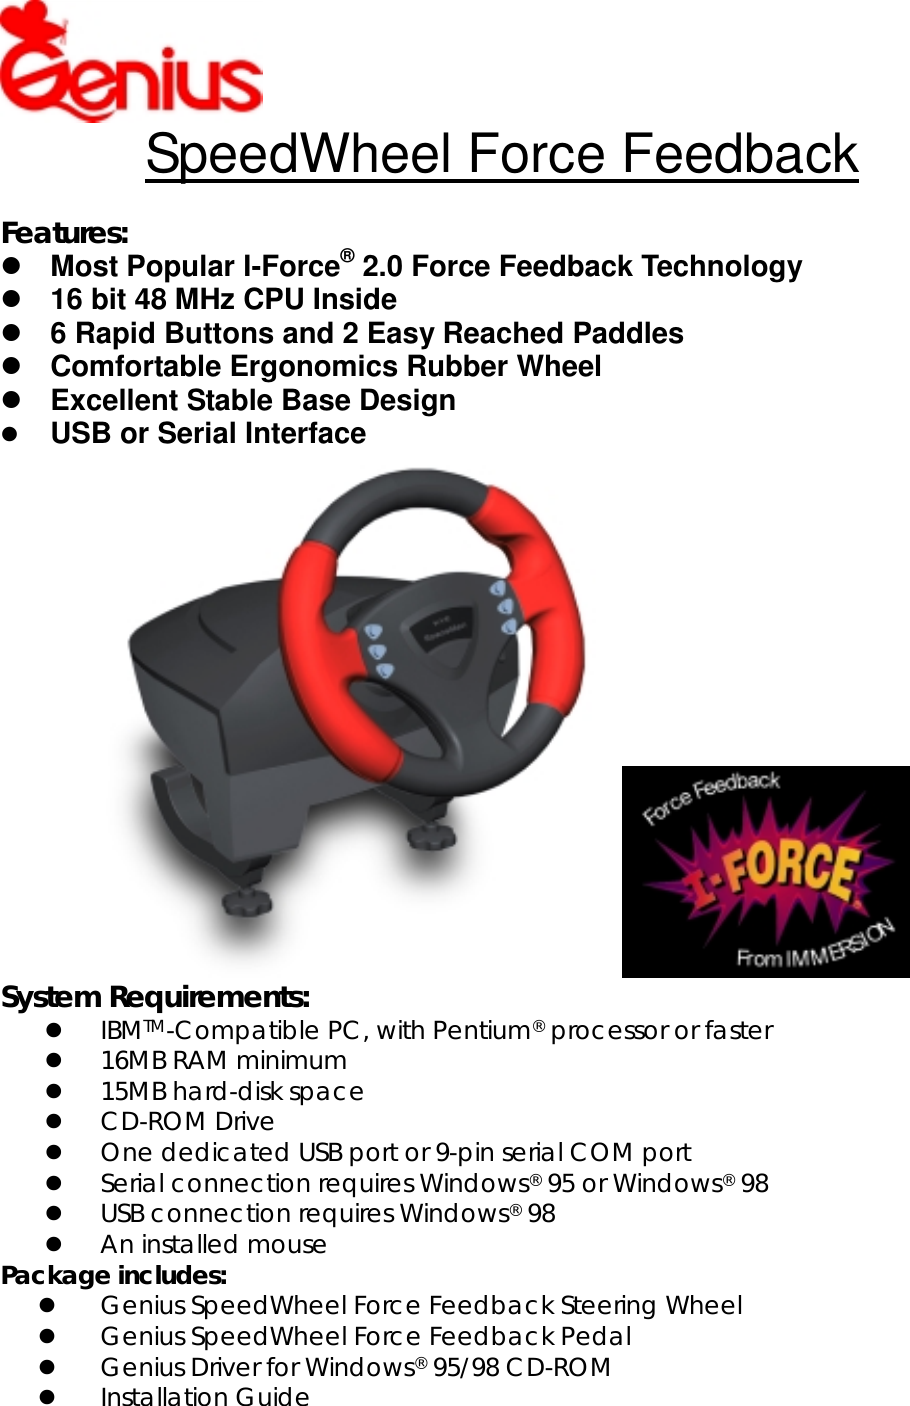 SpeedWheel Force FeedbackFeatures: Most Popular I-Force® 2.0 Force Feedback Technology 16 bit 48 MHz CPU Inside 6 Rapid Buttons and 2 Easy Reached Paddles Comfortable Ergonomics Rubber Wheel Excellent Stable Base Design USB or Serial InterfaceSystem Requirements: IBMTM-Compatible PC, with Pentium® processor or faster 16MB RAM minimum 15MB hard-disk space CD-ROM Drive One dedicated USB port or 9-pin serial COM port Serial connection requires Windows® 95 or Windows® 98 USB connection requires Windows® 98 An installed mousePackage includes: Genius SpeedWheel Force Feedback Steering Wheel Genius SpeedWheel Force Feedback Pedal Genius Driver for Windows® 95/98 CD-ROM Installation Guide